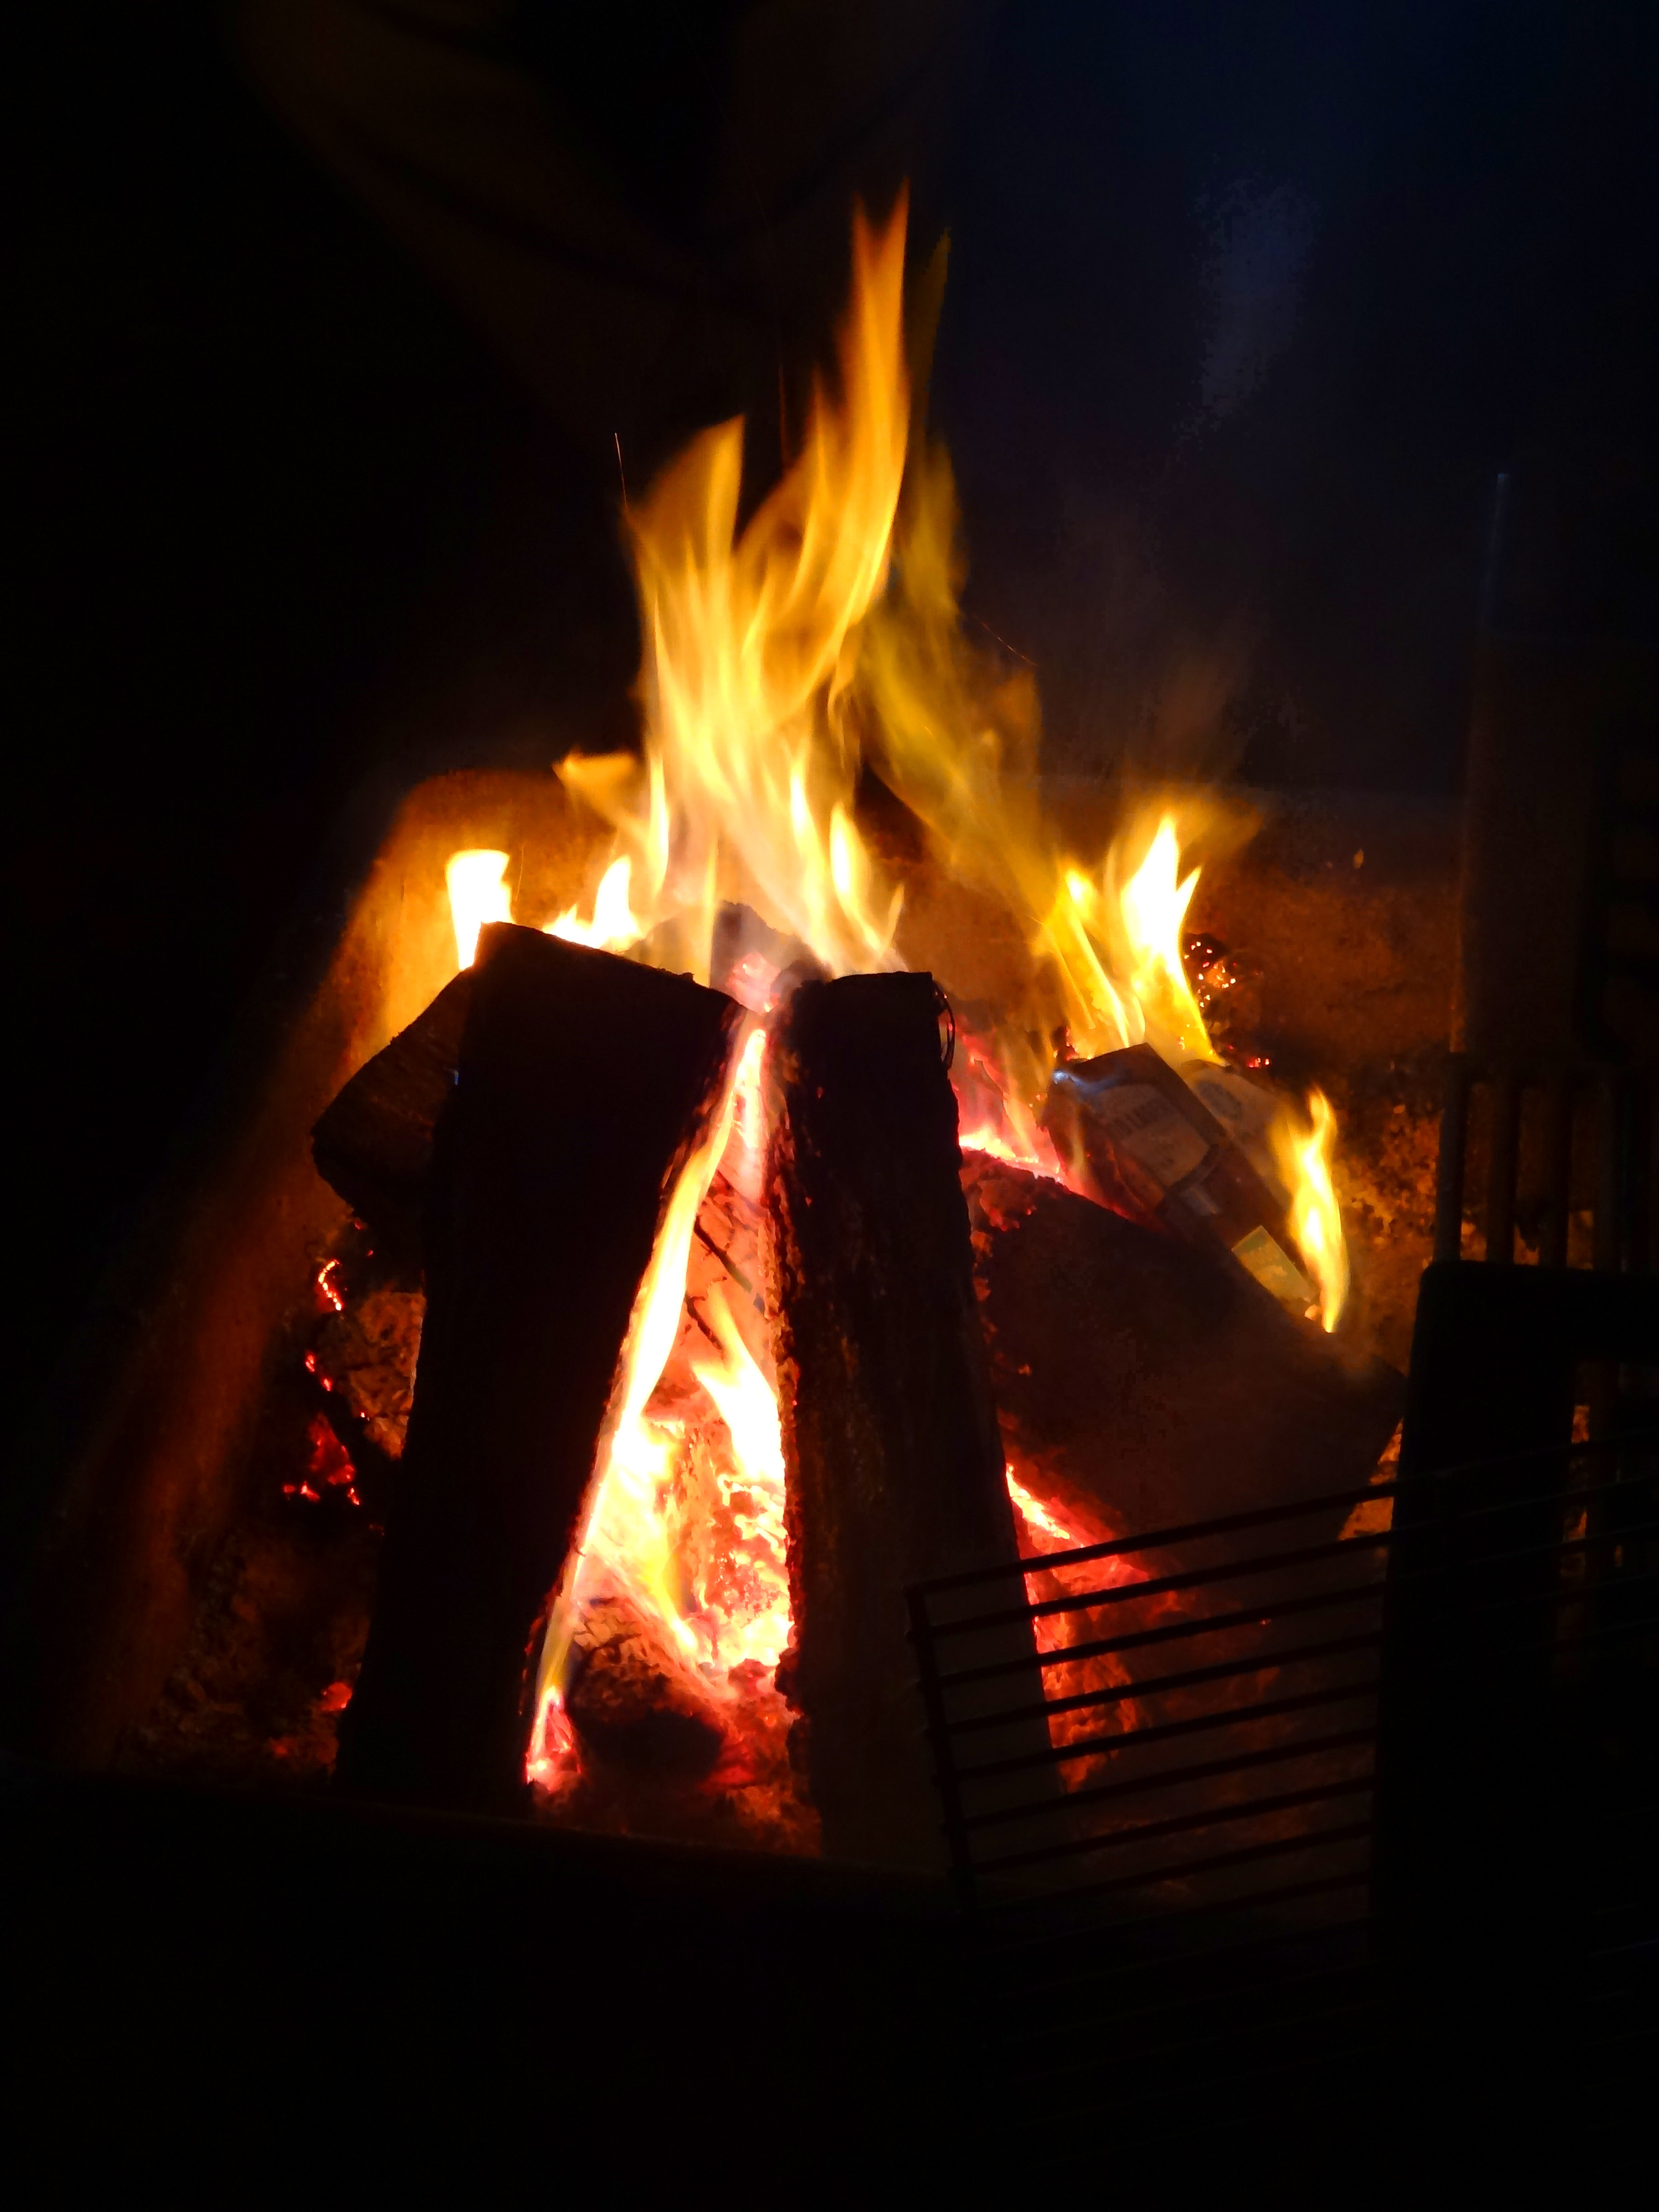 Flames in a fire pit at night - Blaze Stock Photography